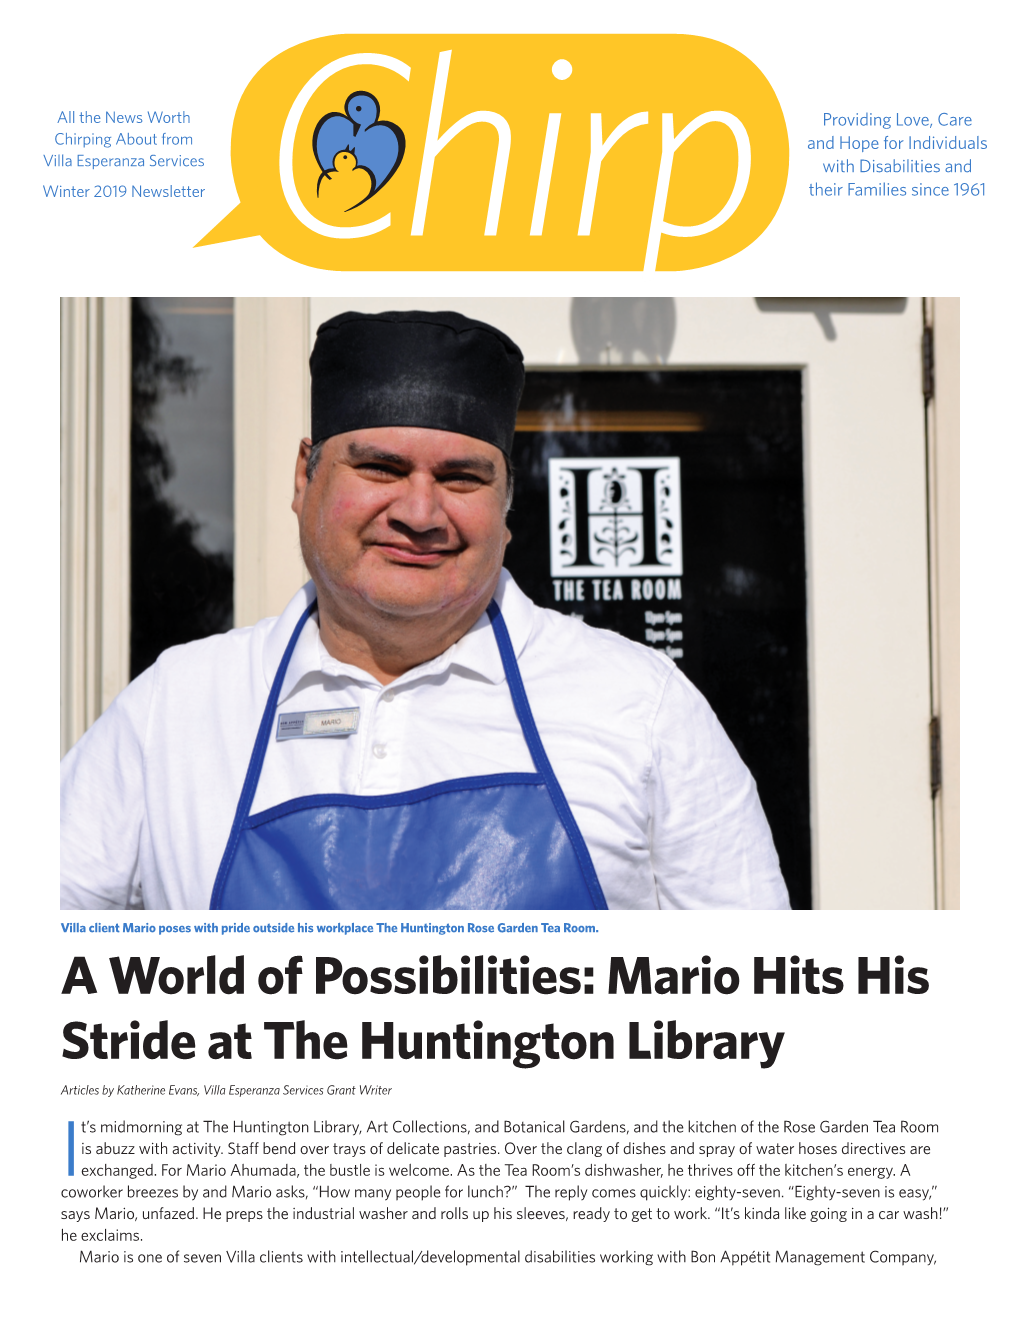 A World of Possibilities: Mario Hits His Stride at the Huntington Library Articles by Katherine Evans, Villa Esperanza Services Grant Writer